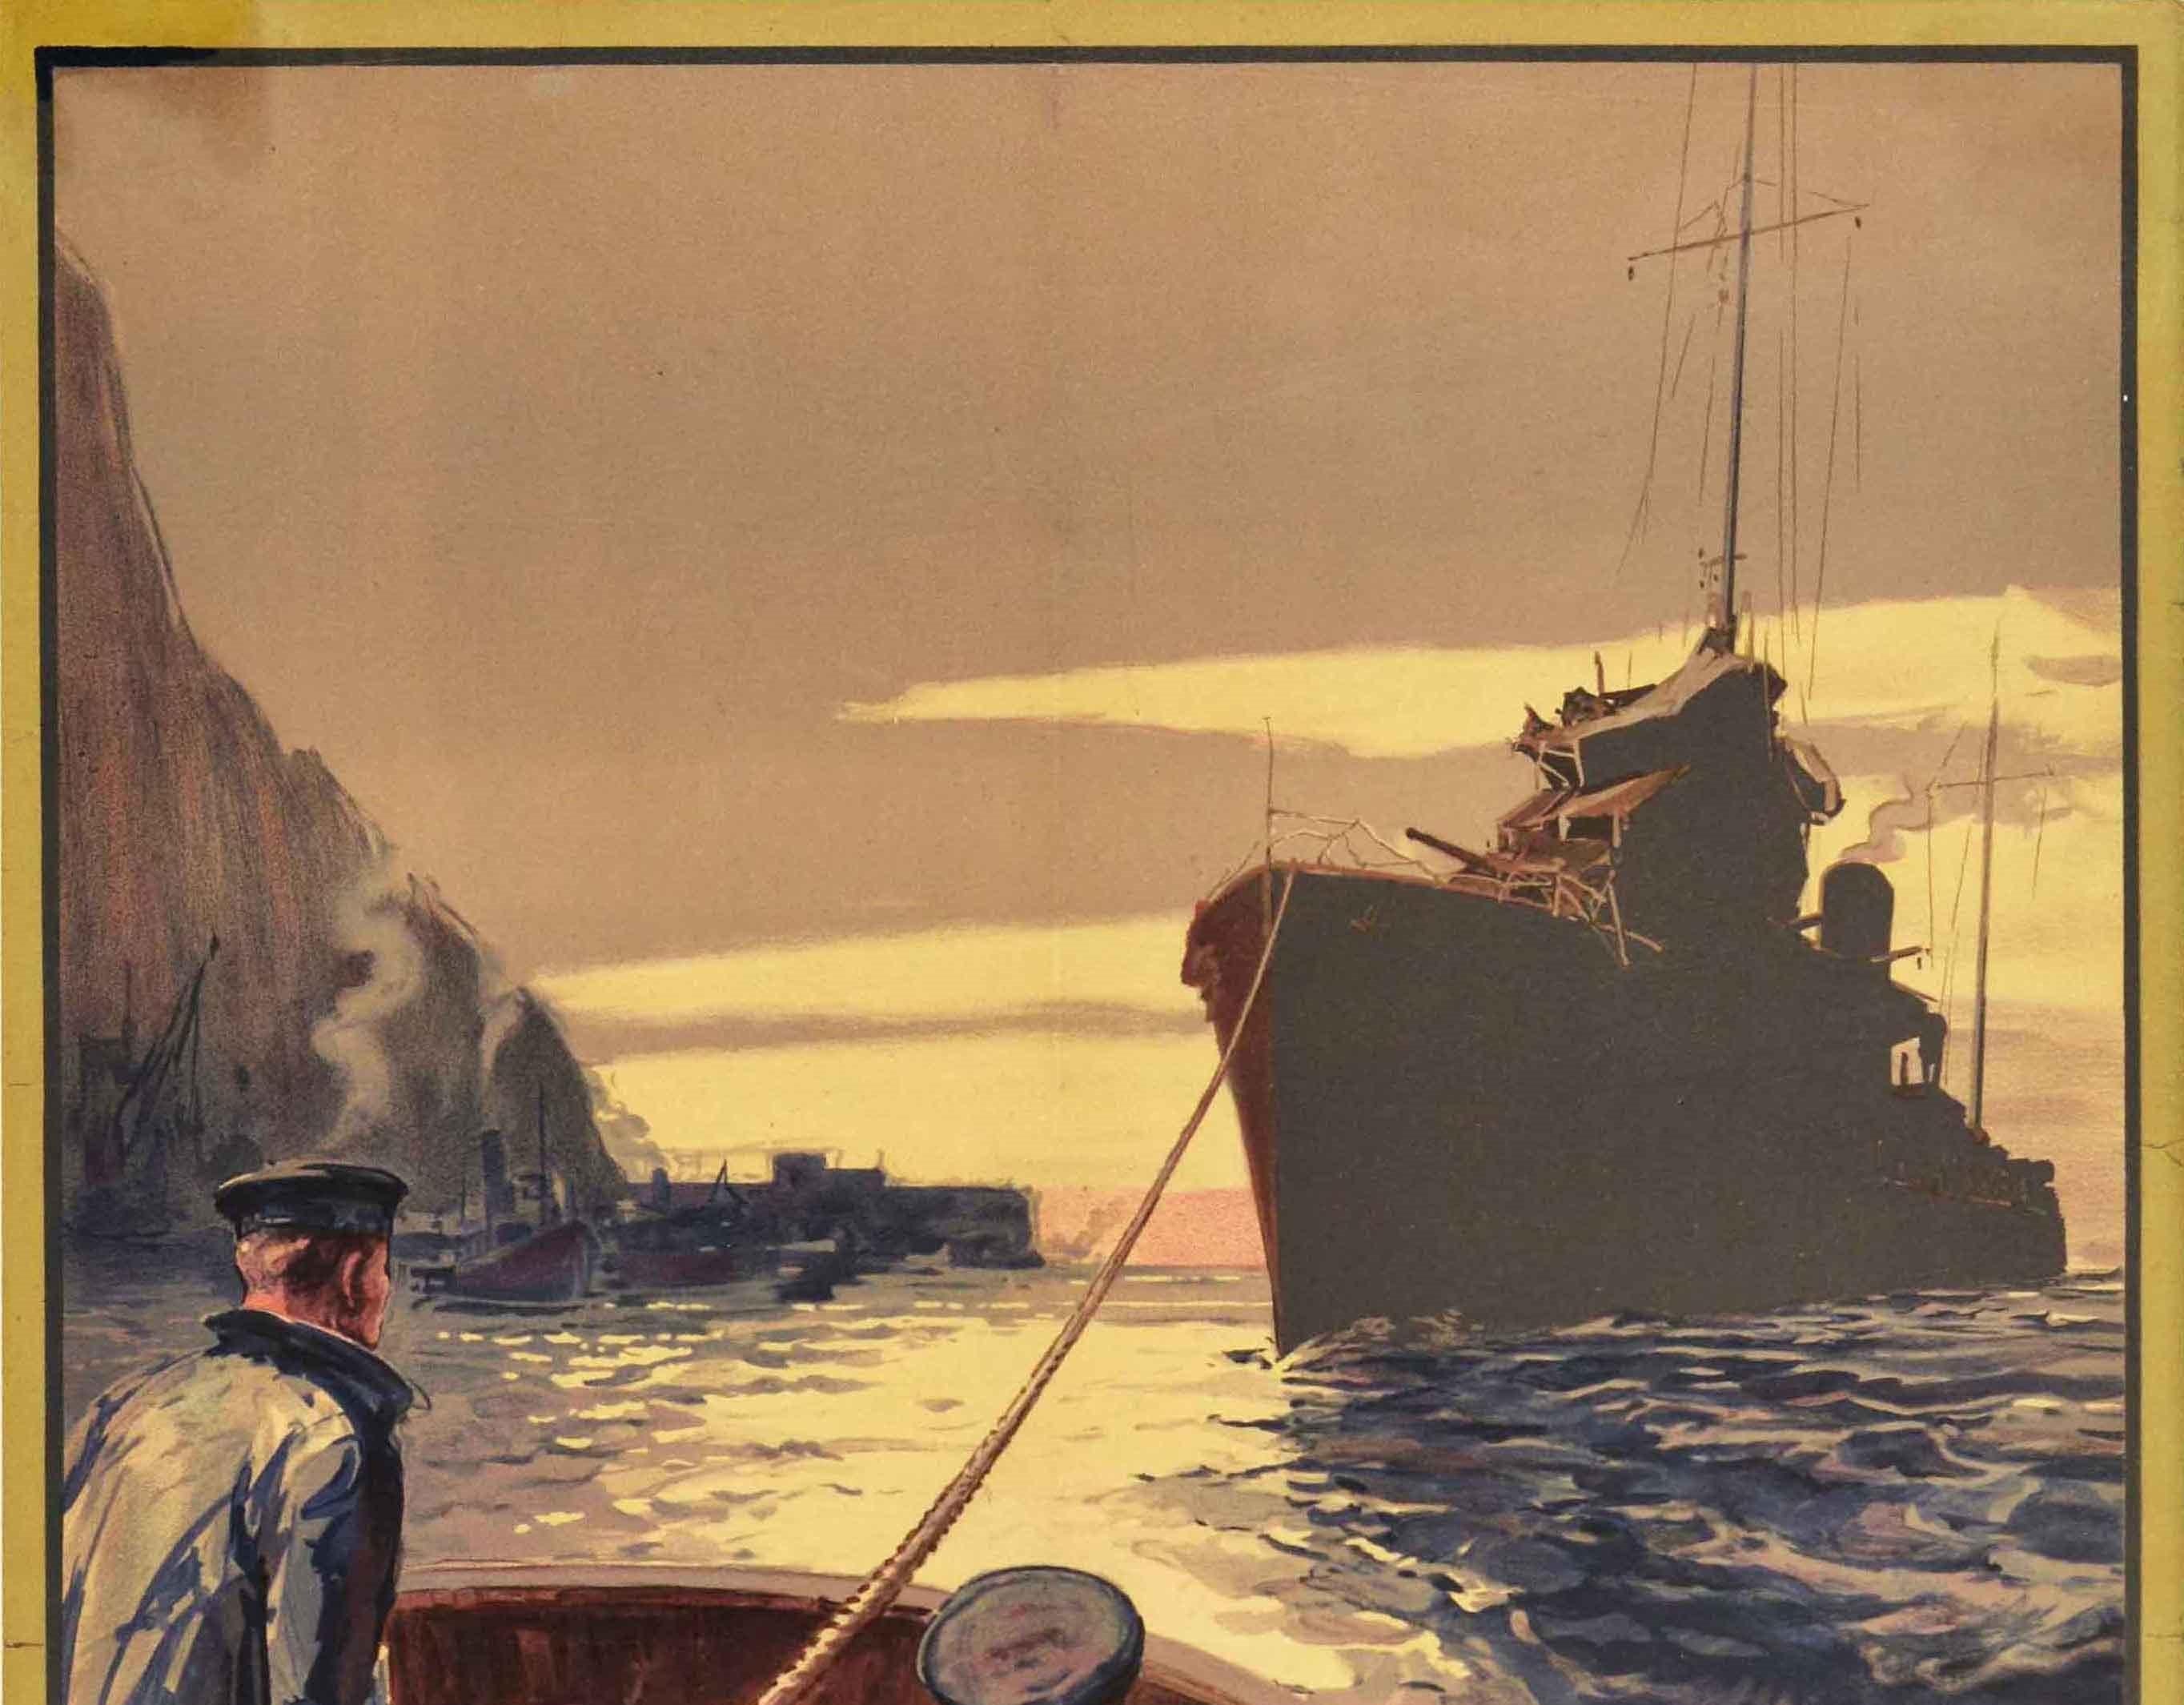 Original vintage World War Two poster featuring artwork of two sailors on a boat with a tow rope leading to a large naval ship on a choppy sea with a dramatic sky in the background, the bold text below: Your Tow Ropes - Their Home Tie. Ministry of